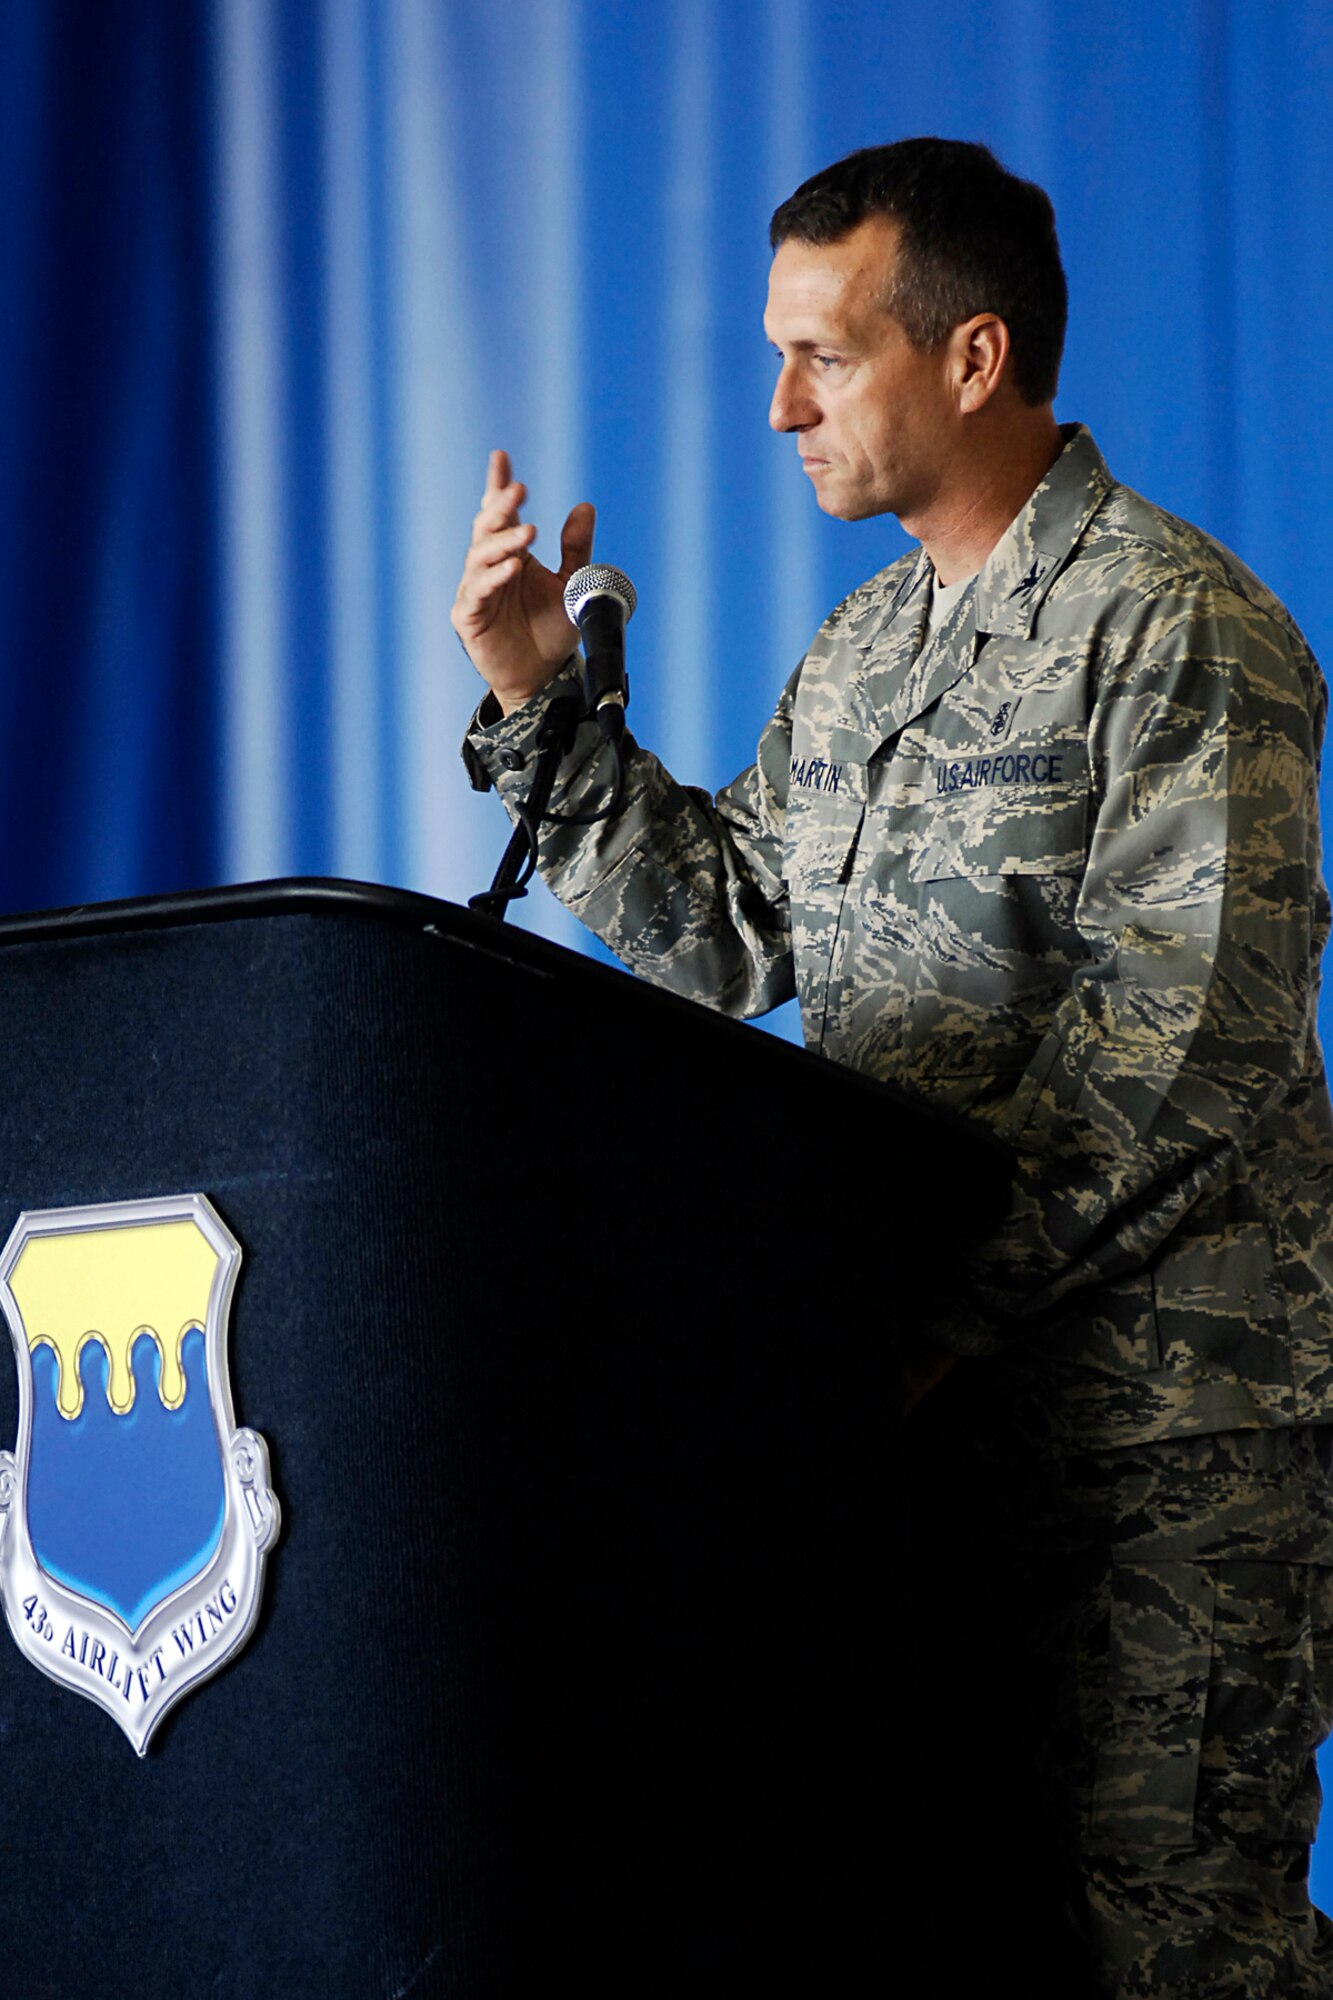 Col. Paul Martin, 43rd Medical Group Commander, speaks to the audience after assuming command July 1. (U.S. Air Force Photo by Mike Murchison)